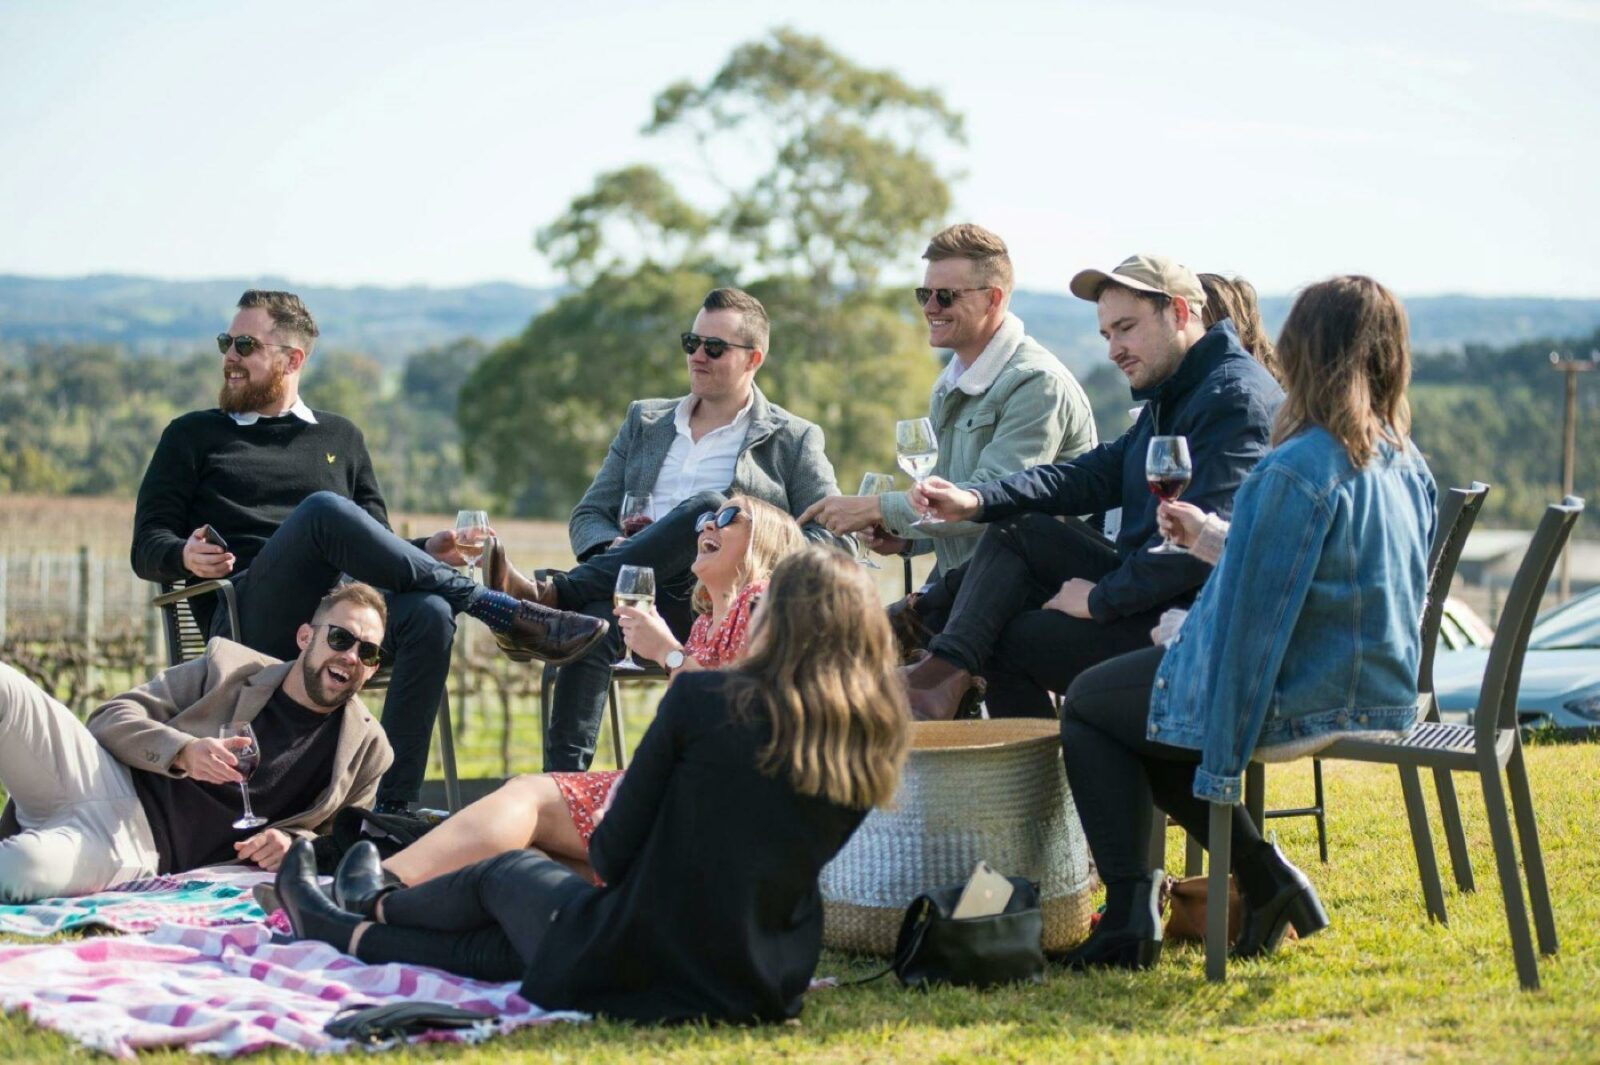 A group of friends sitting on chairs and a picnic rug , enjoying a glass of wine and the views